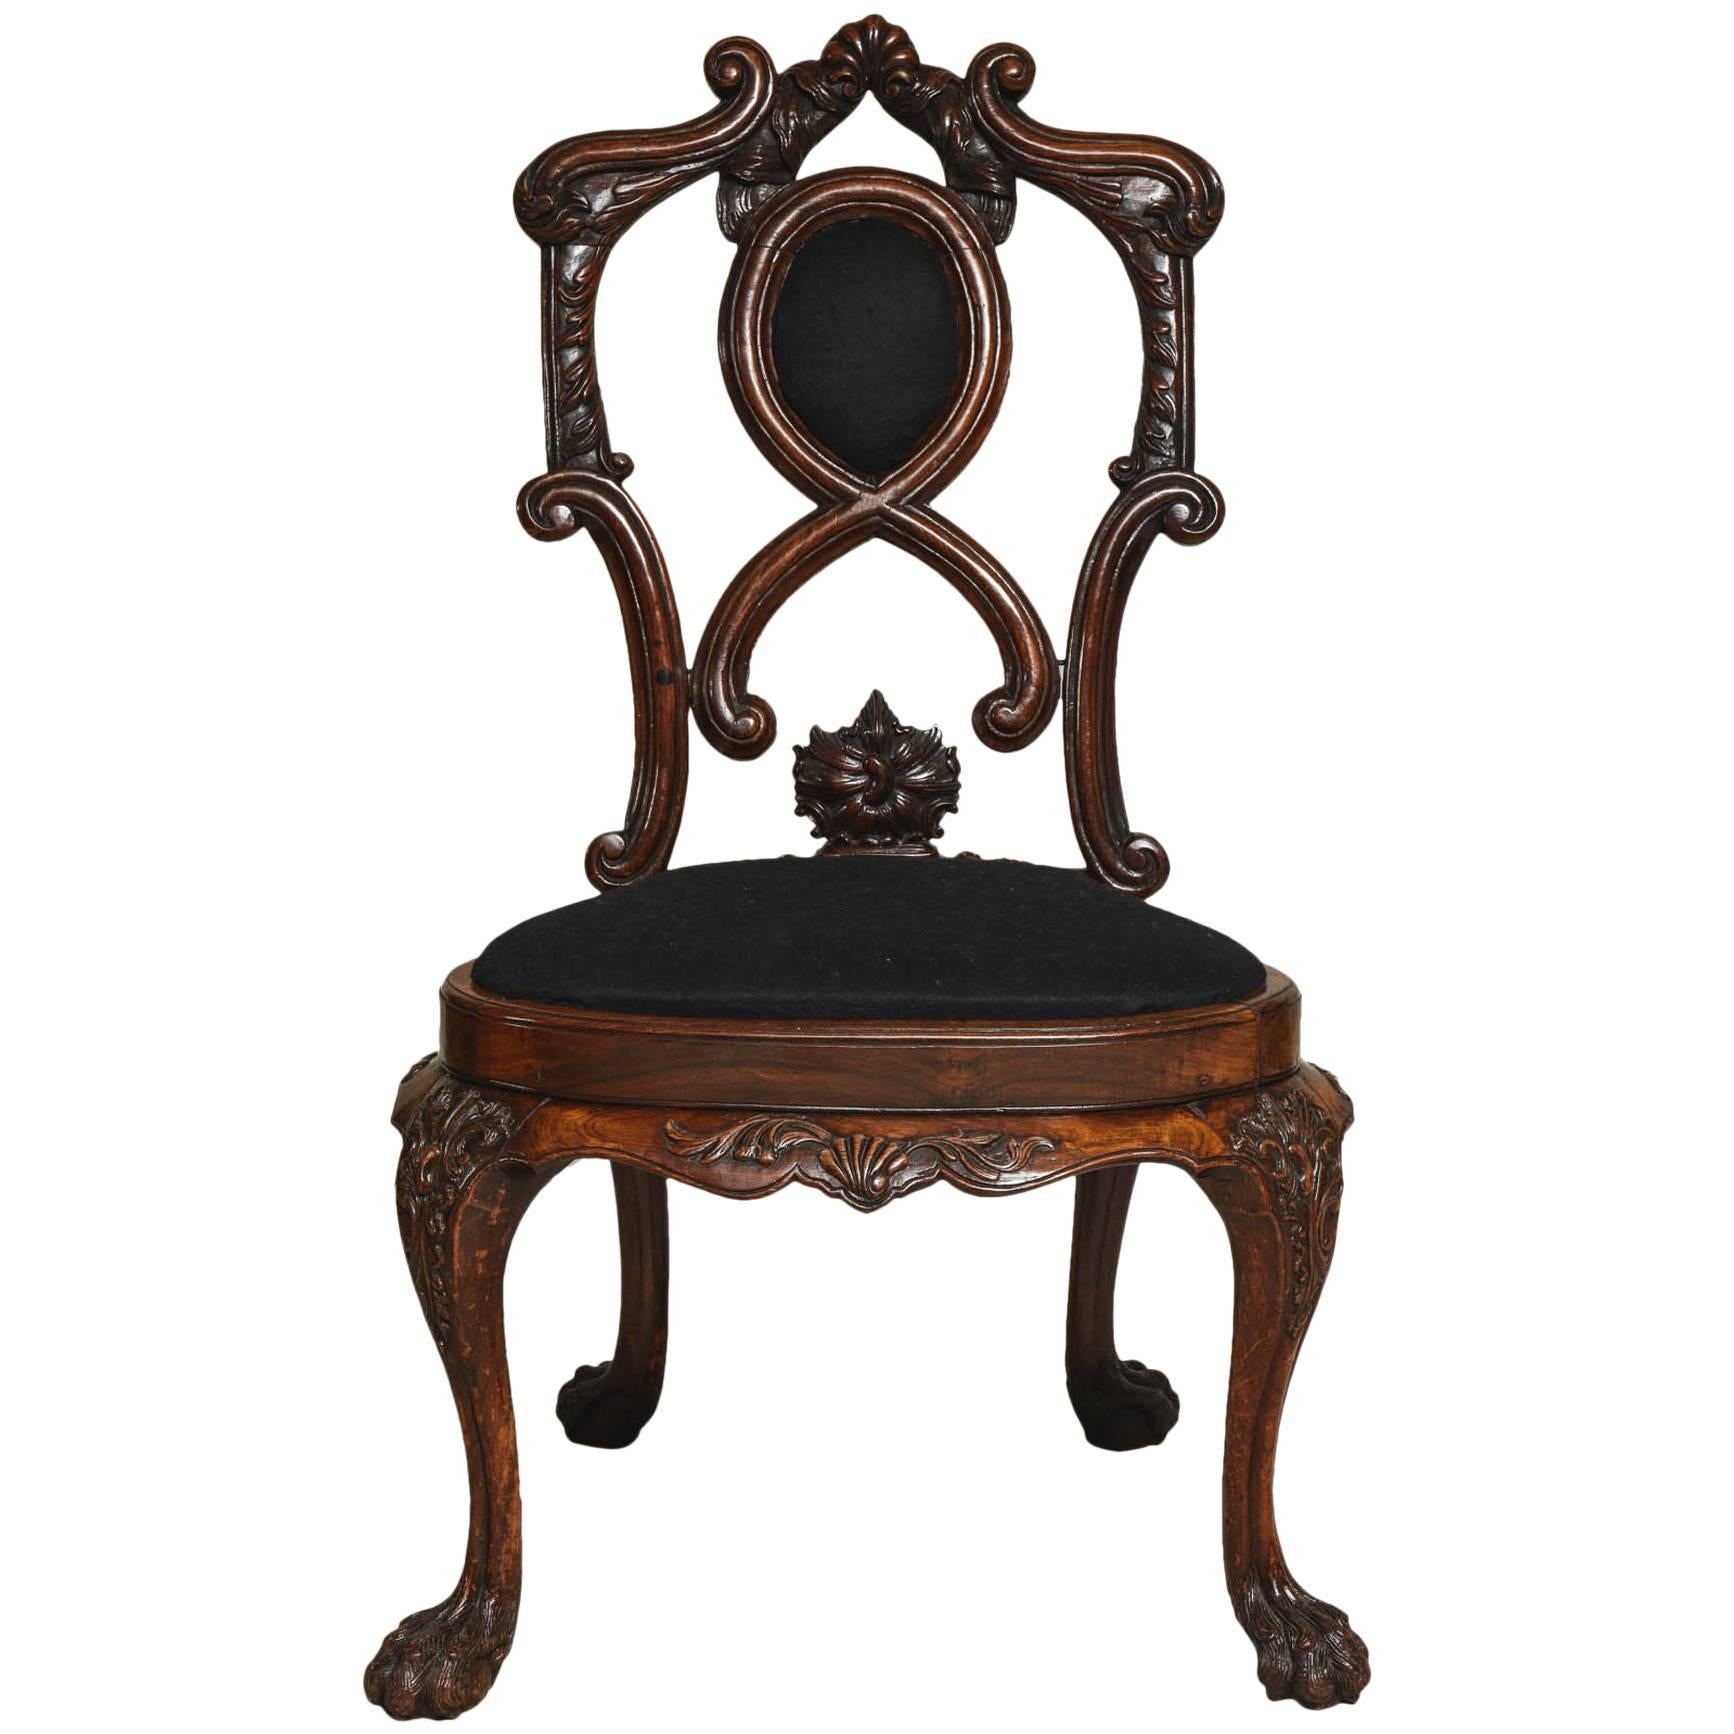 Important 18th Century Portuguese Chair